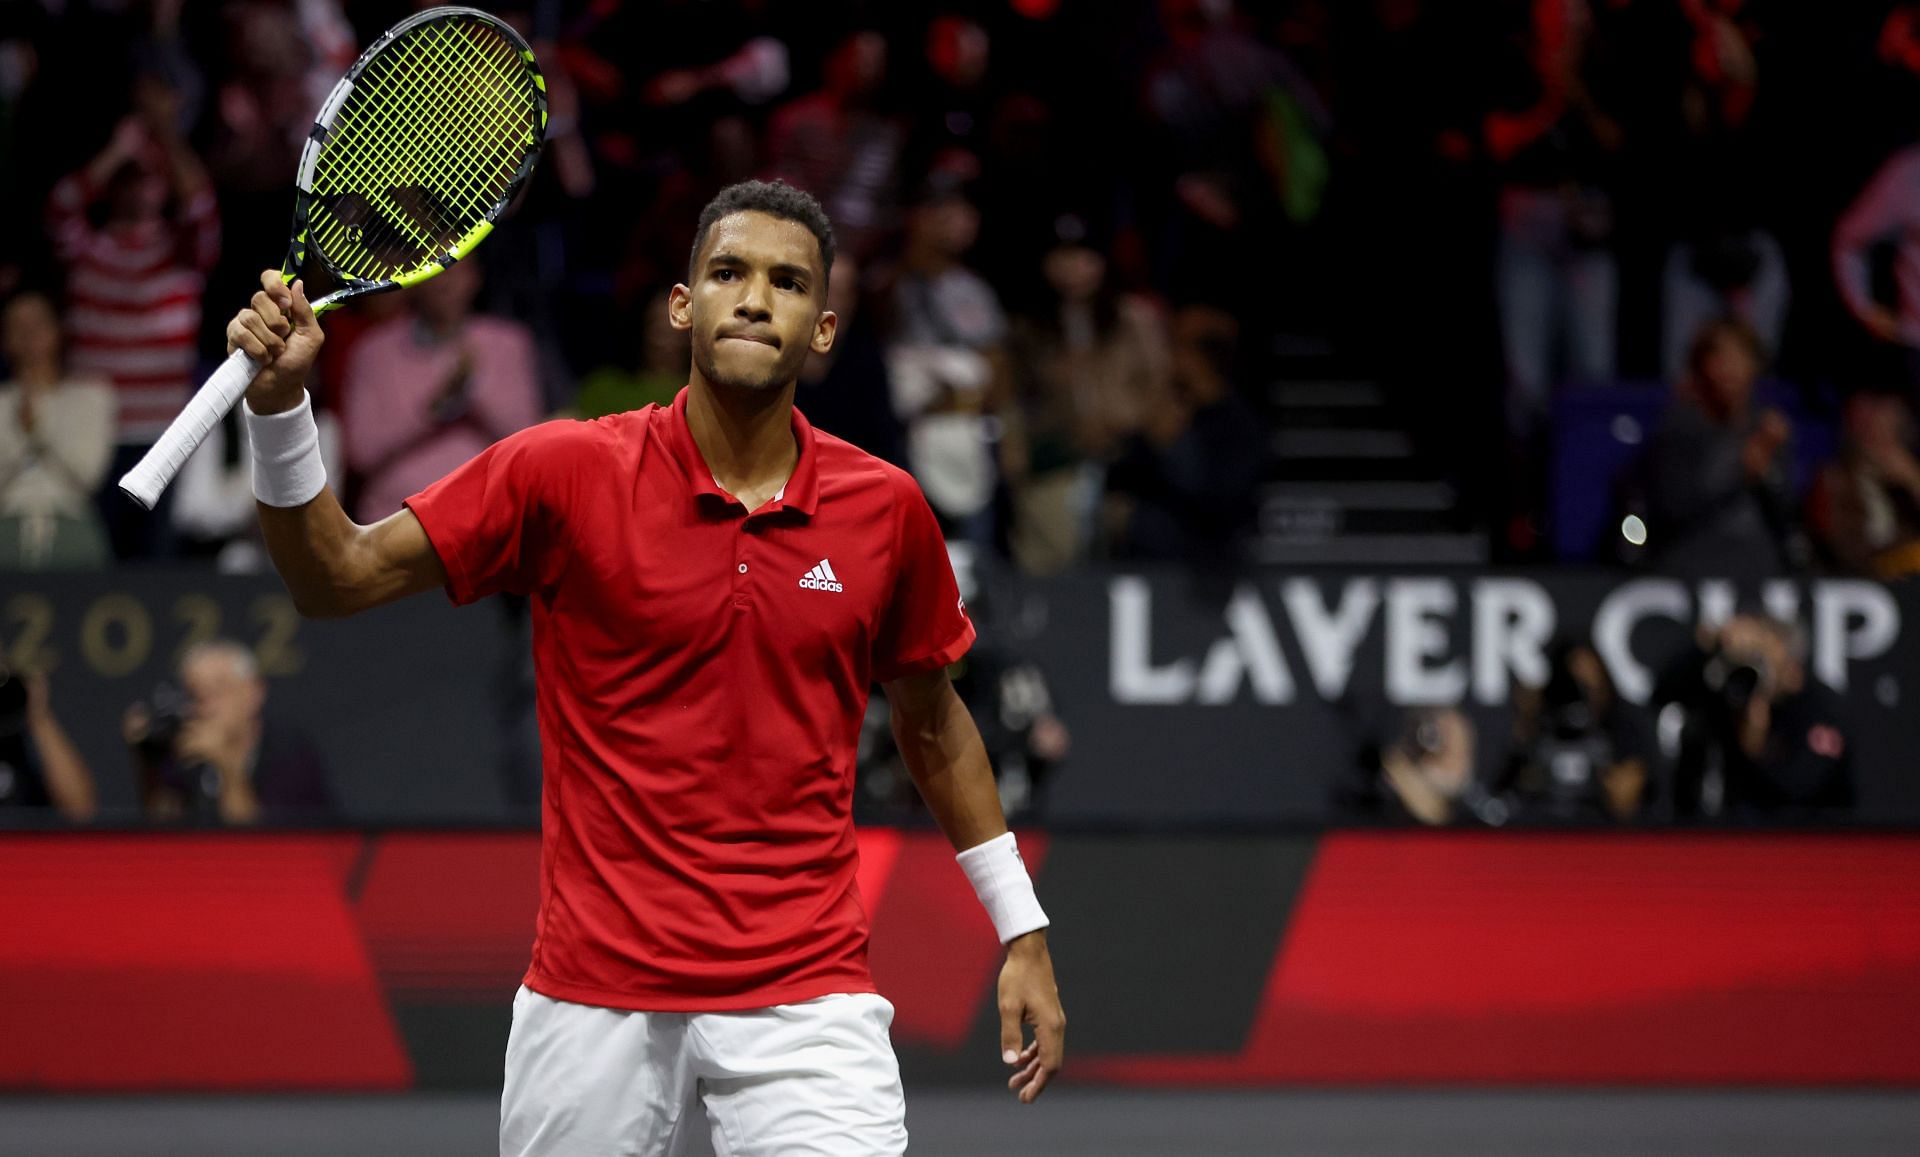 Felix Auger Aliassime at the Laver Cup 2022